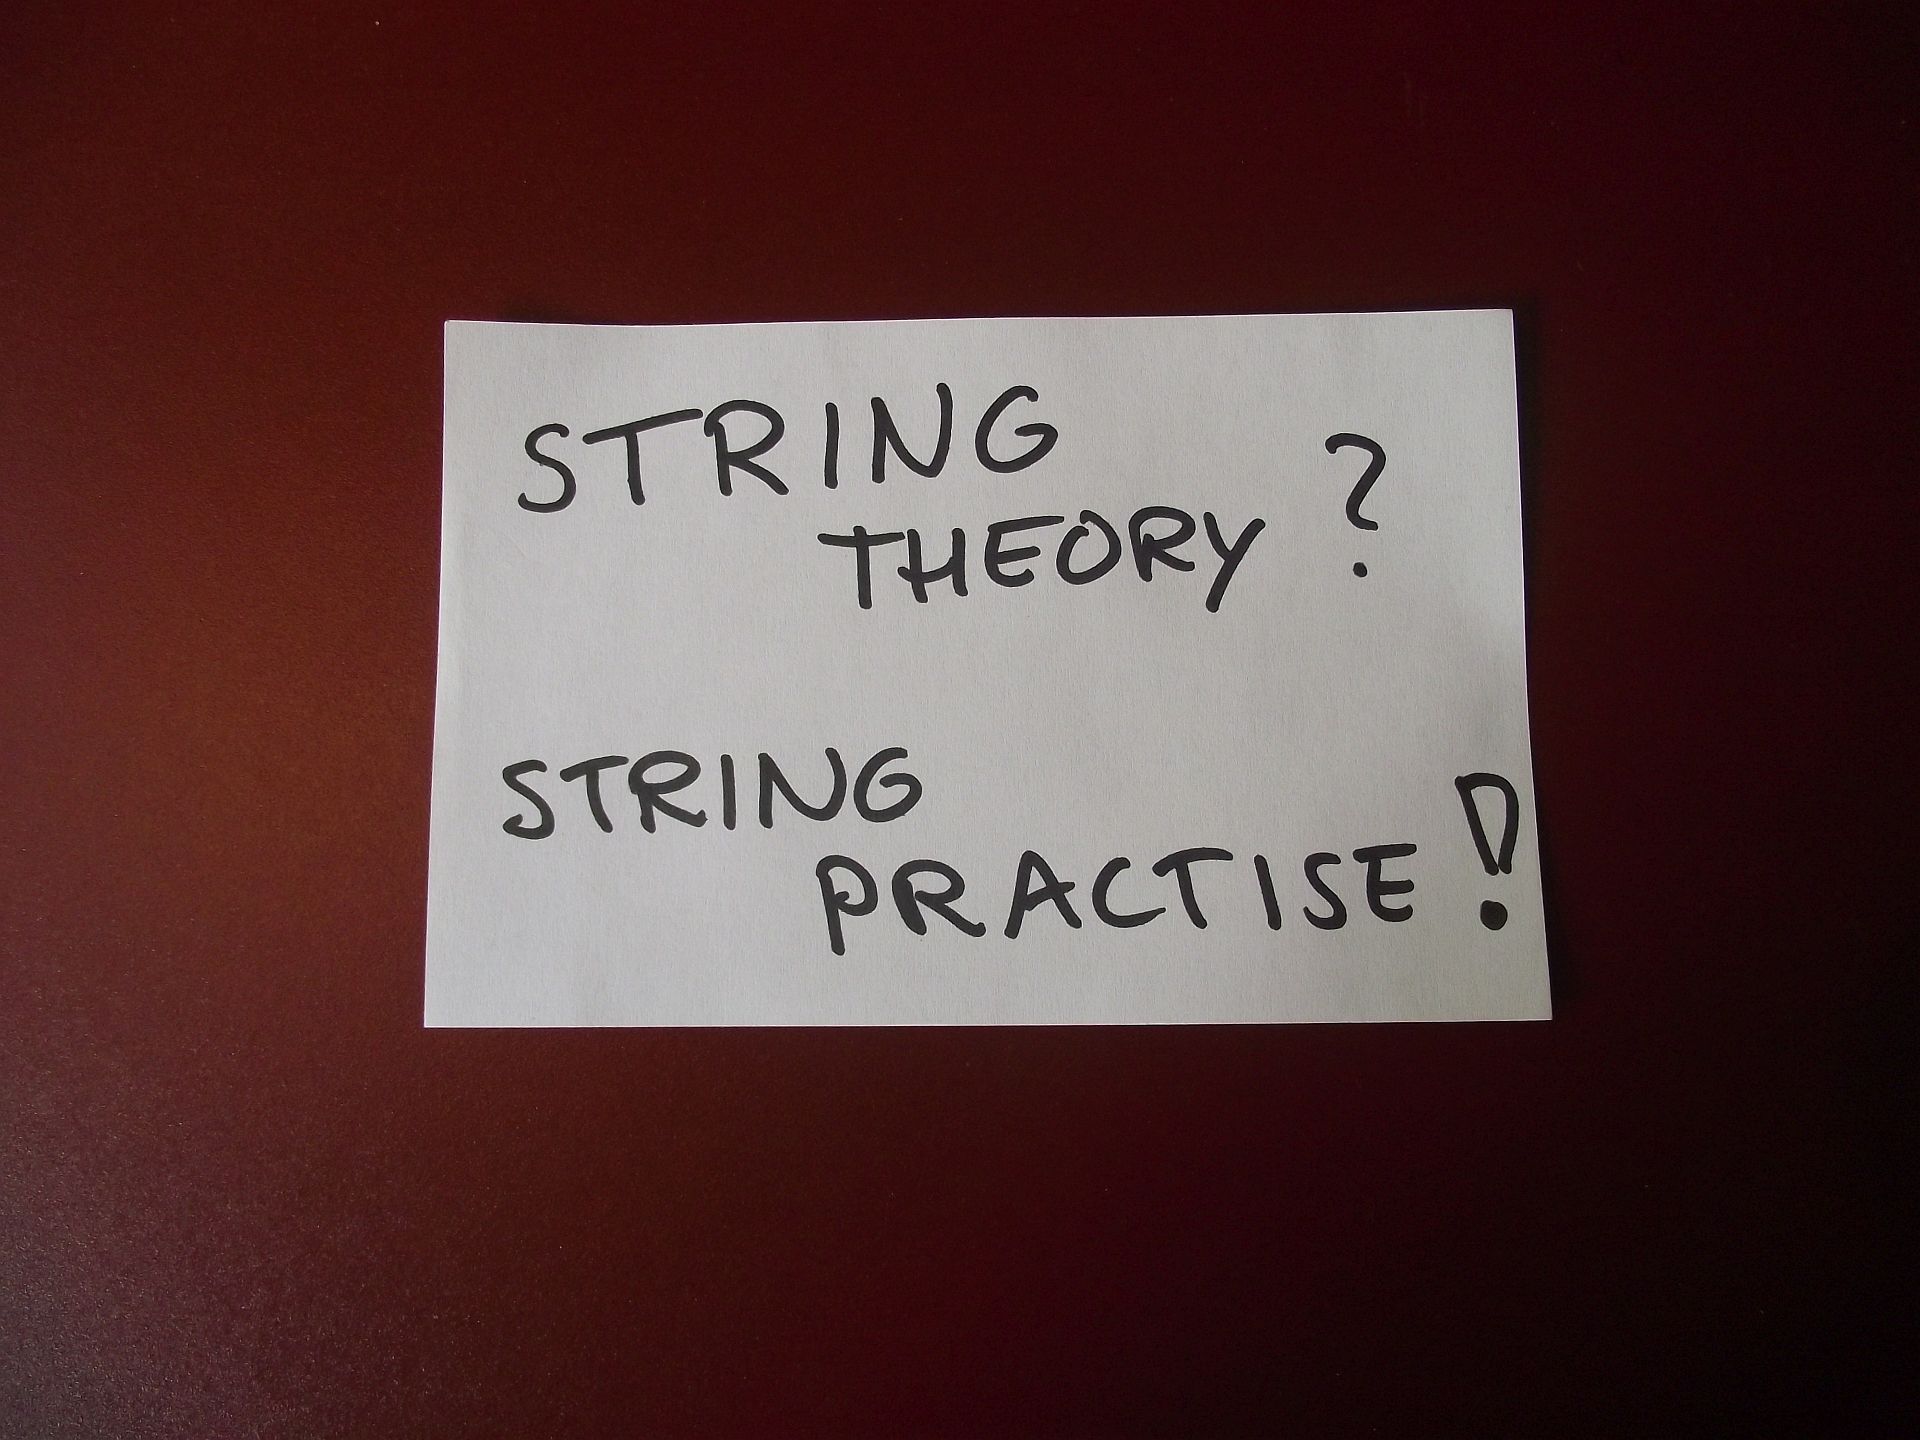 String theory? String Practice!